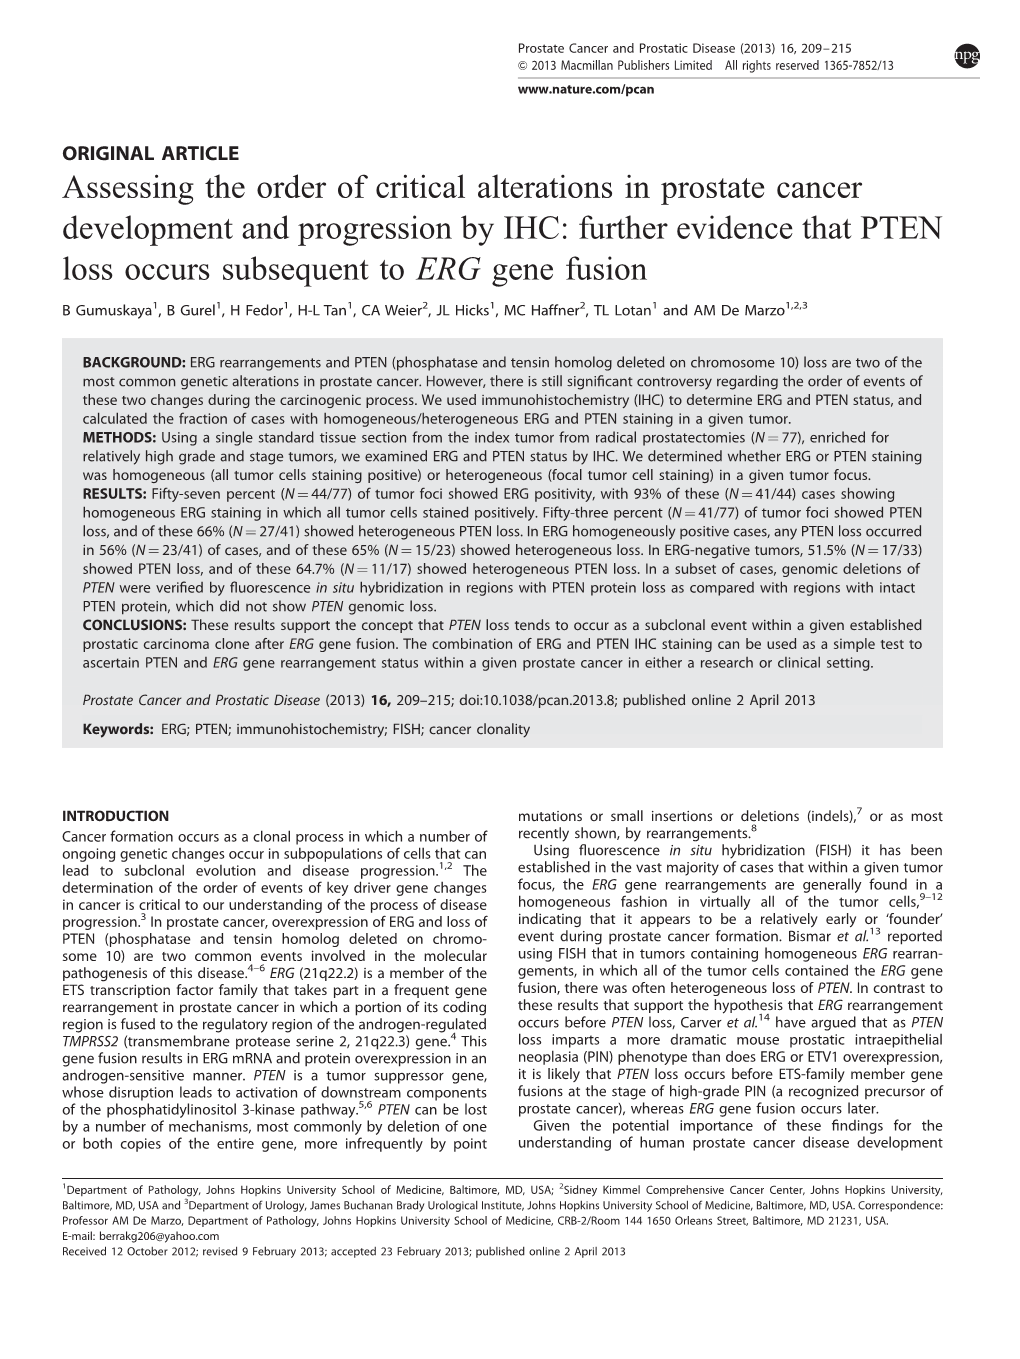 Further Evidence That PTEN Loss Occurs Subsequent to ERG Gene Fusion